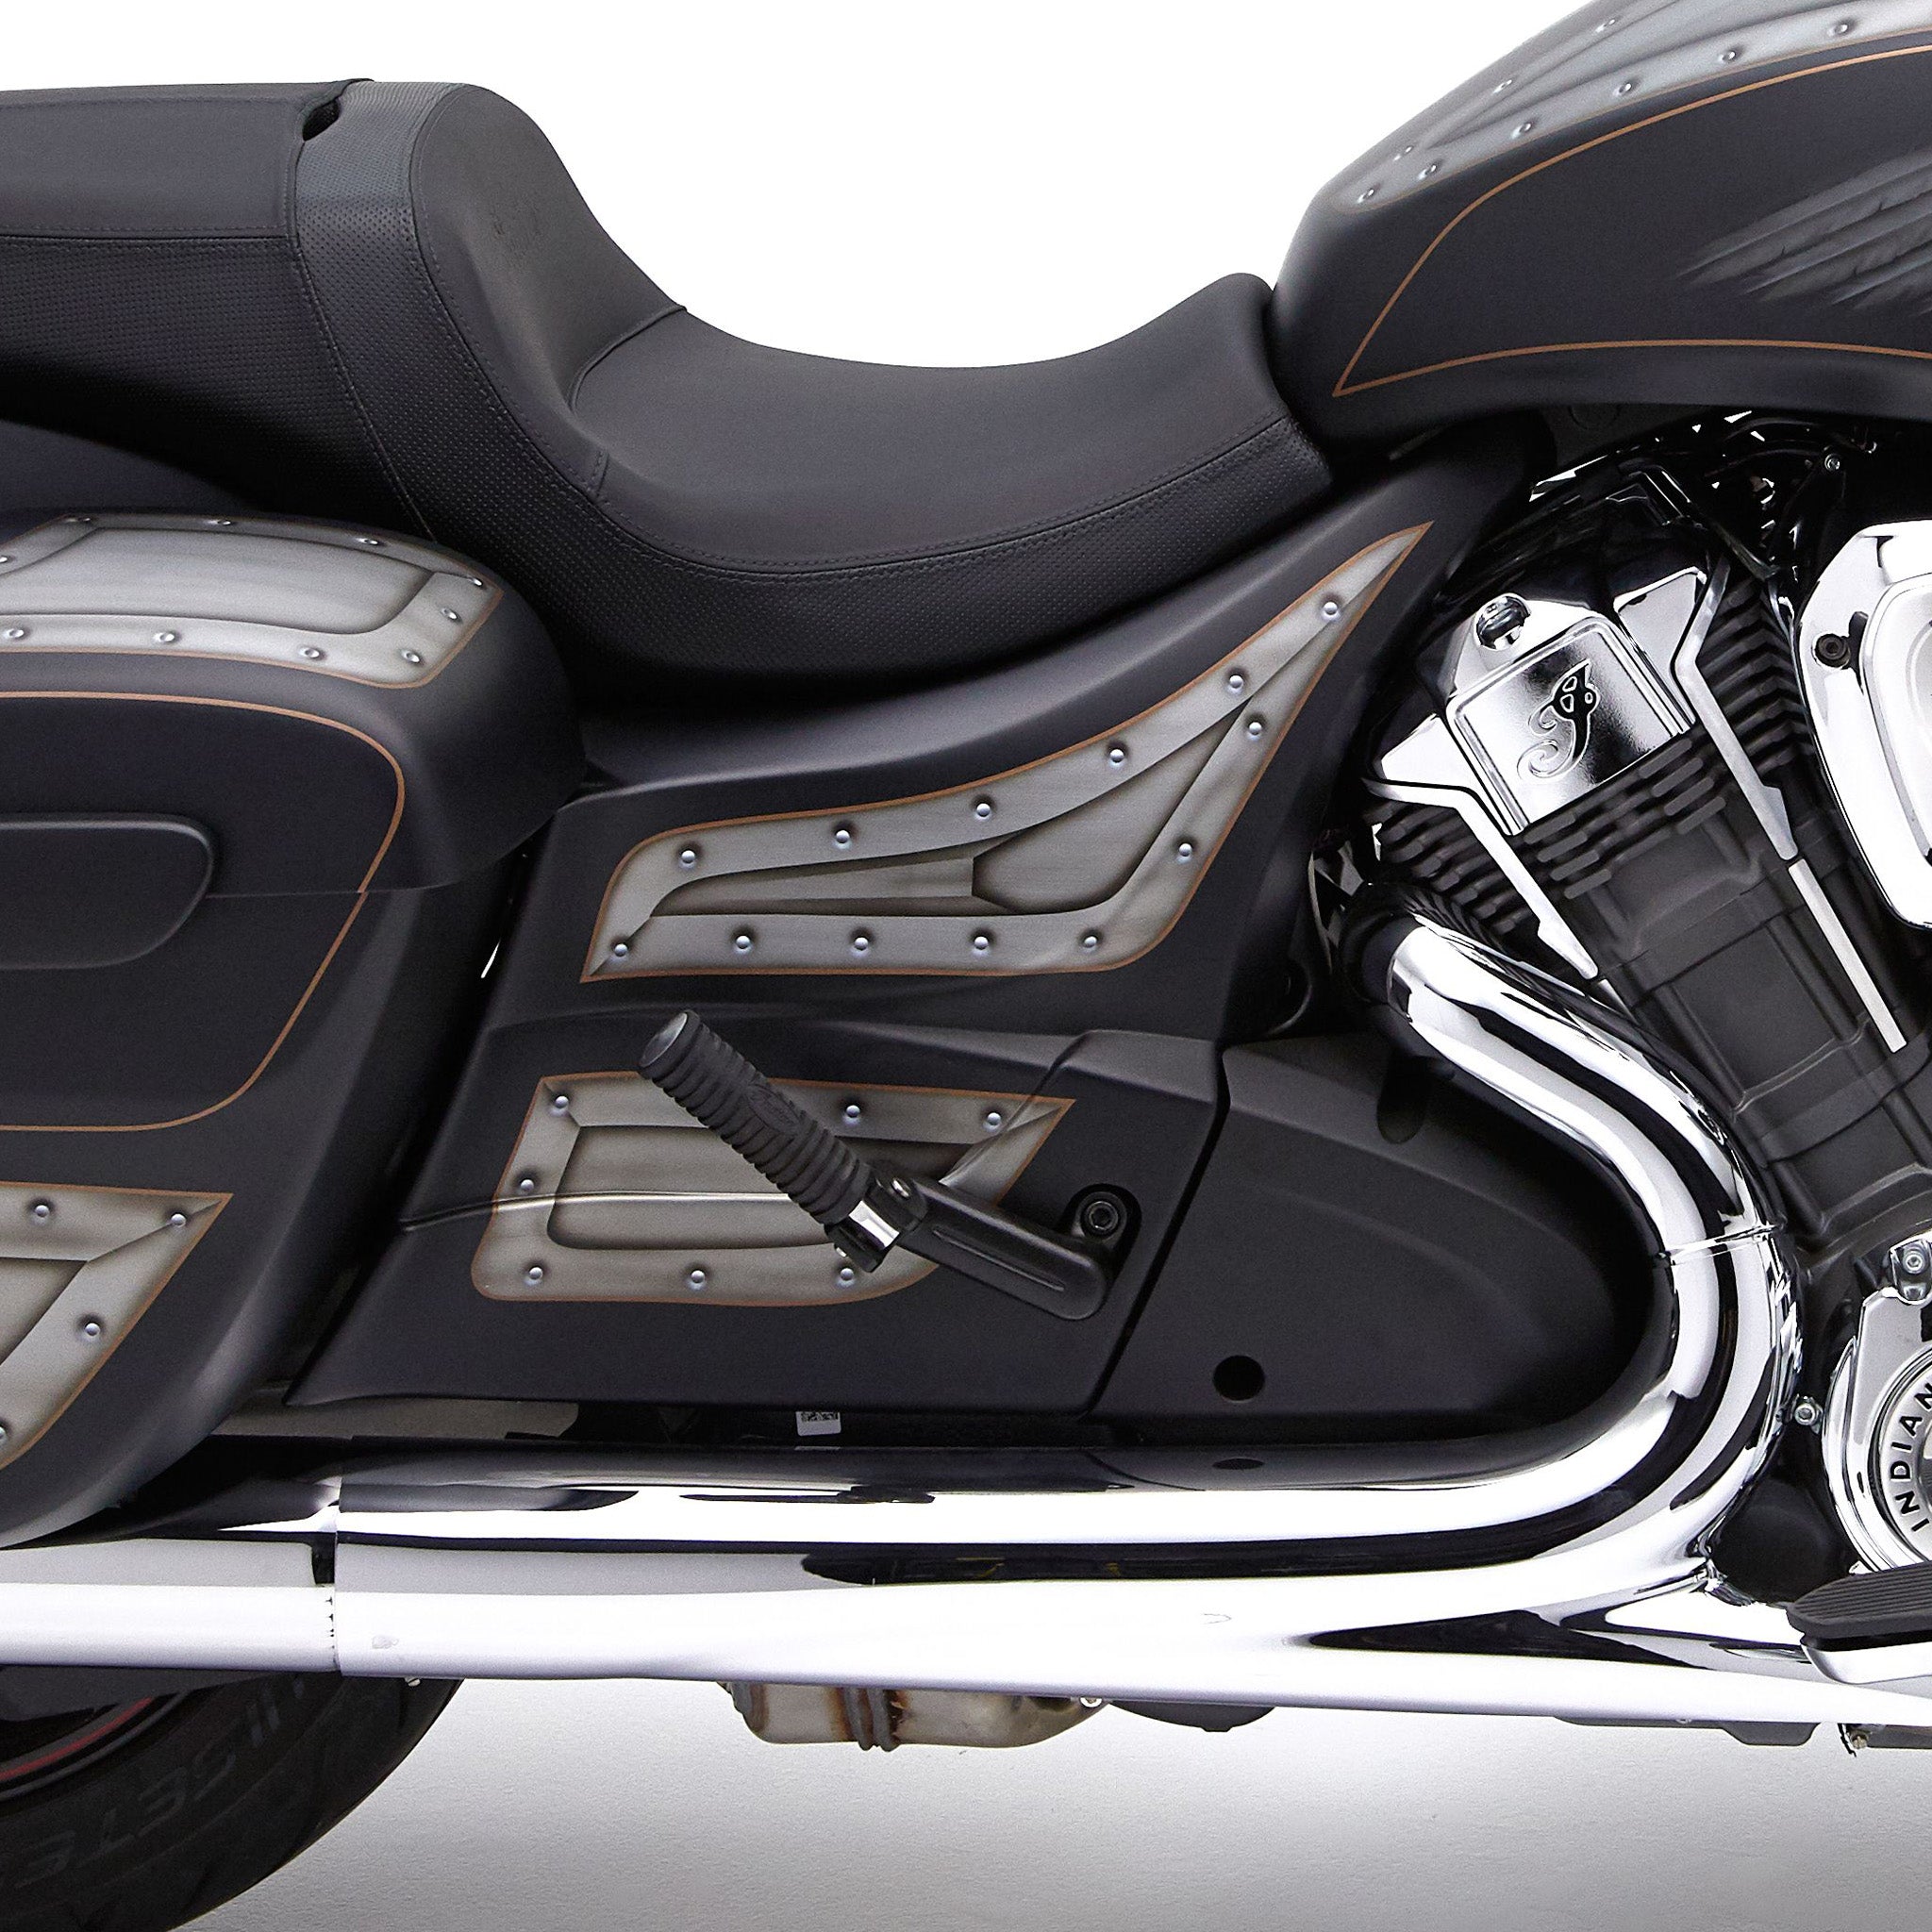 Reytelo Side Covers for Indian® 2020-2024 Challenger and Pursuit on black and gray bike